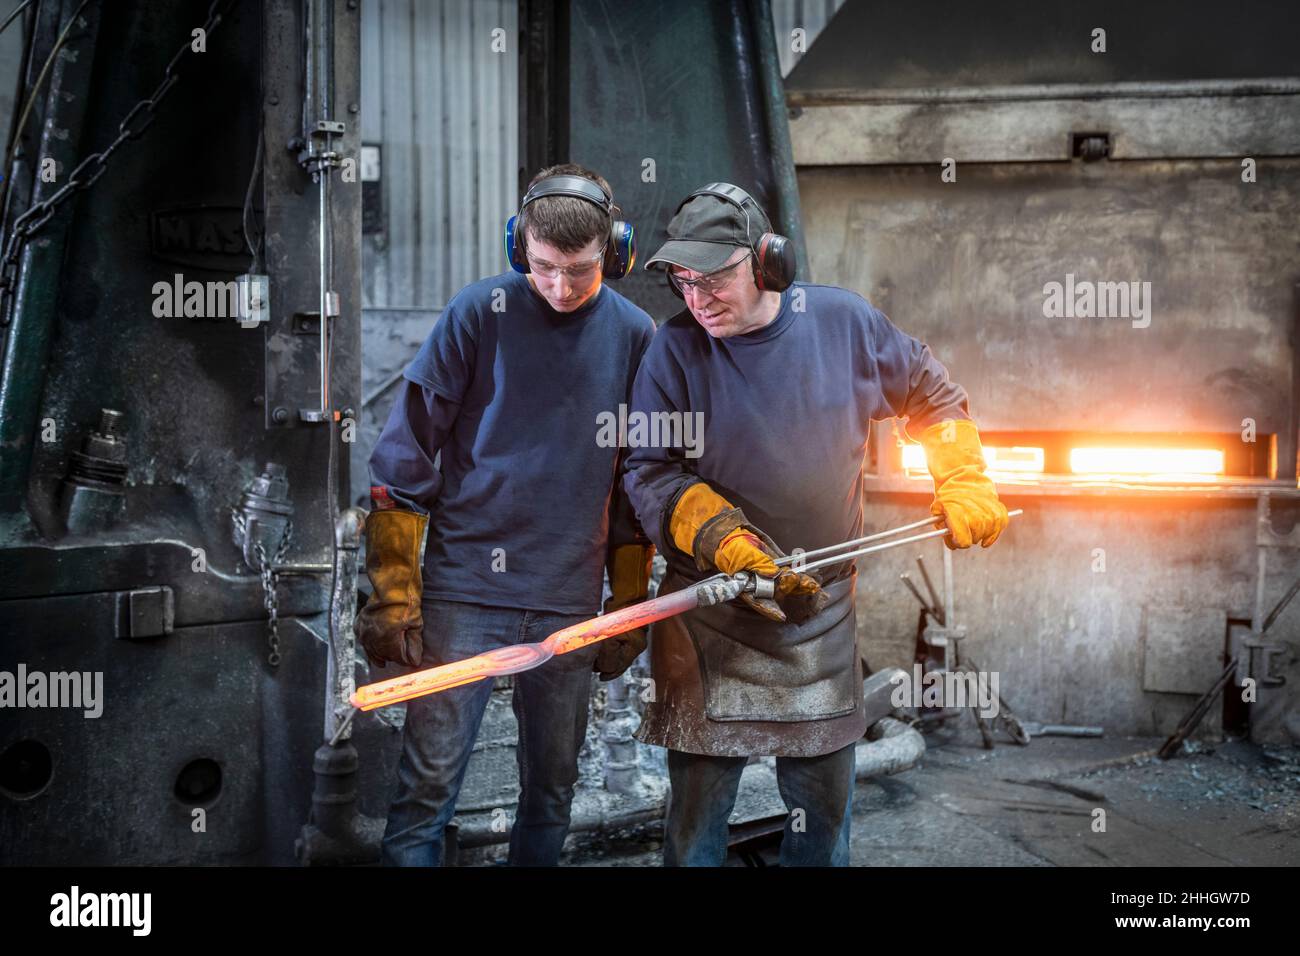 Engineer with apprentice inspecting a forged steel part in industrial forge Stock Photo